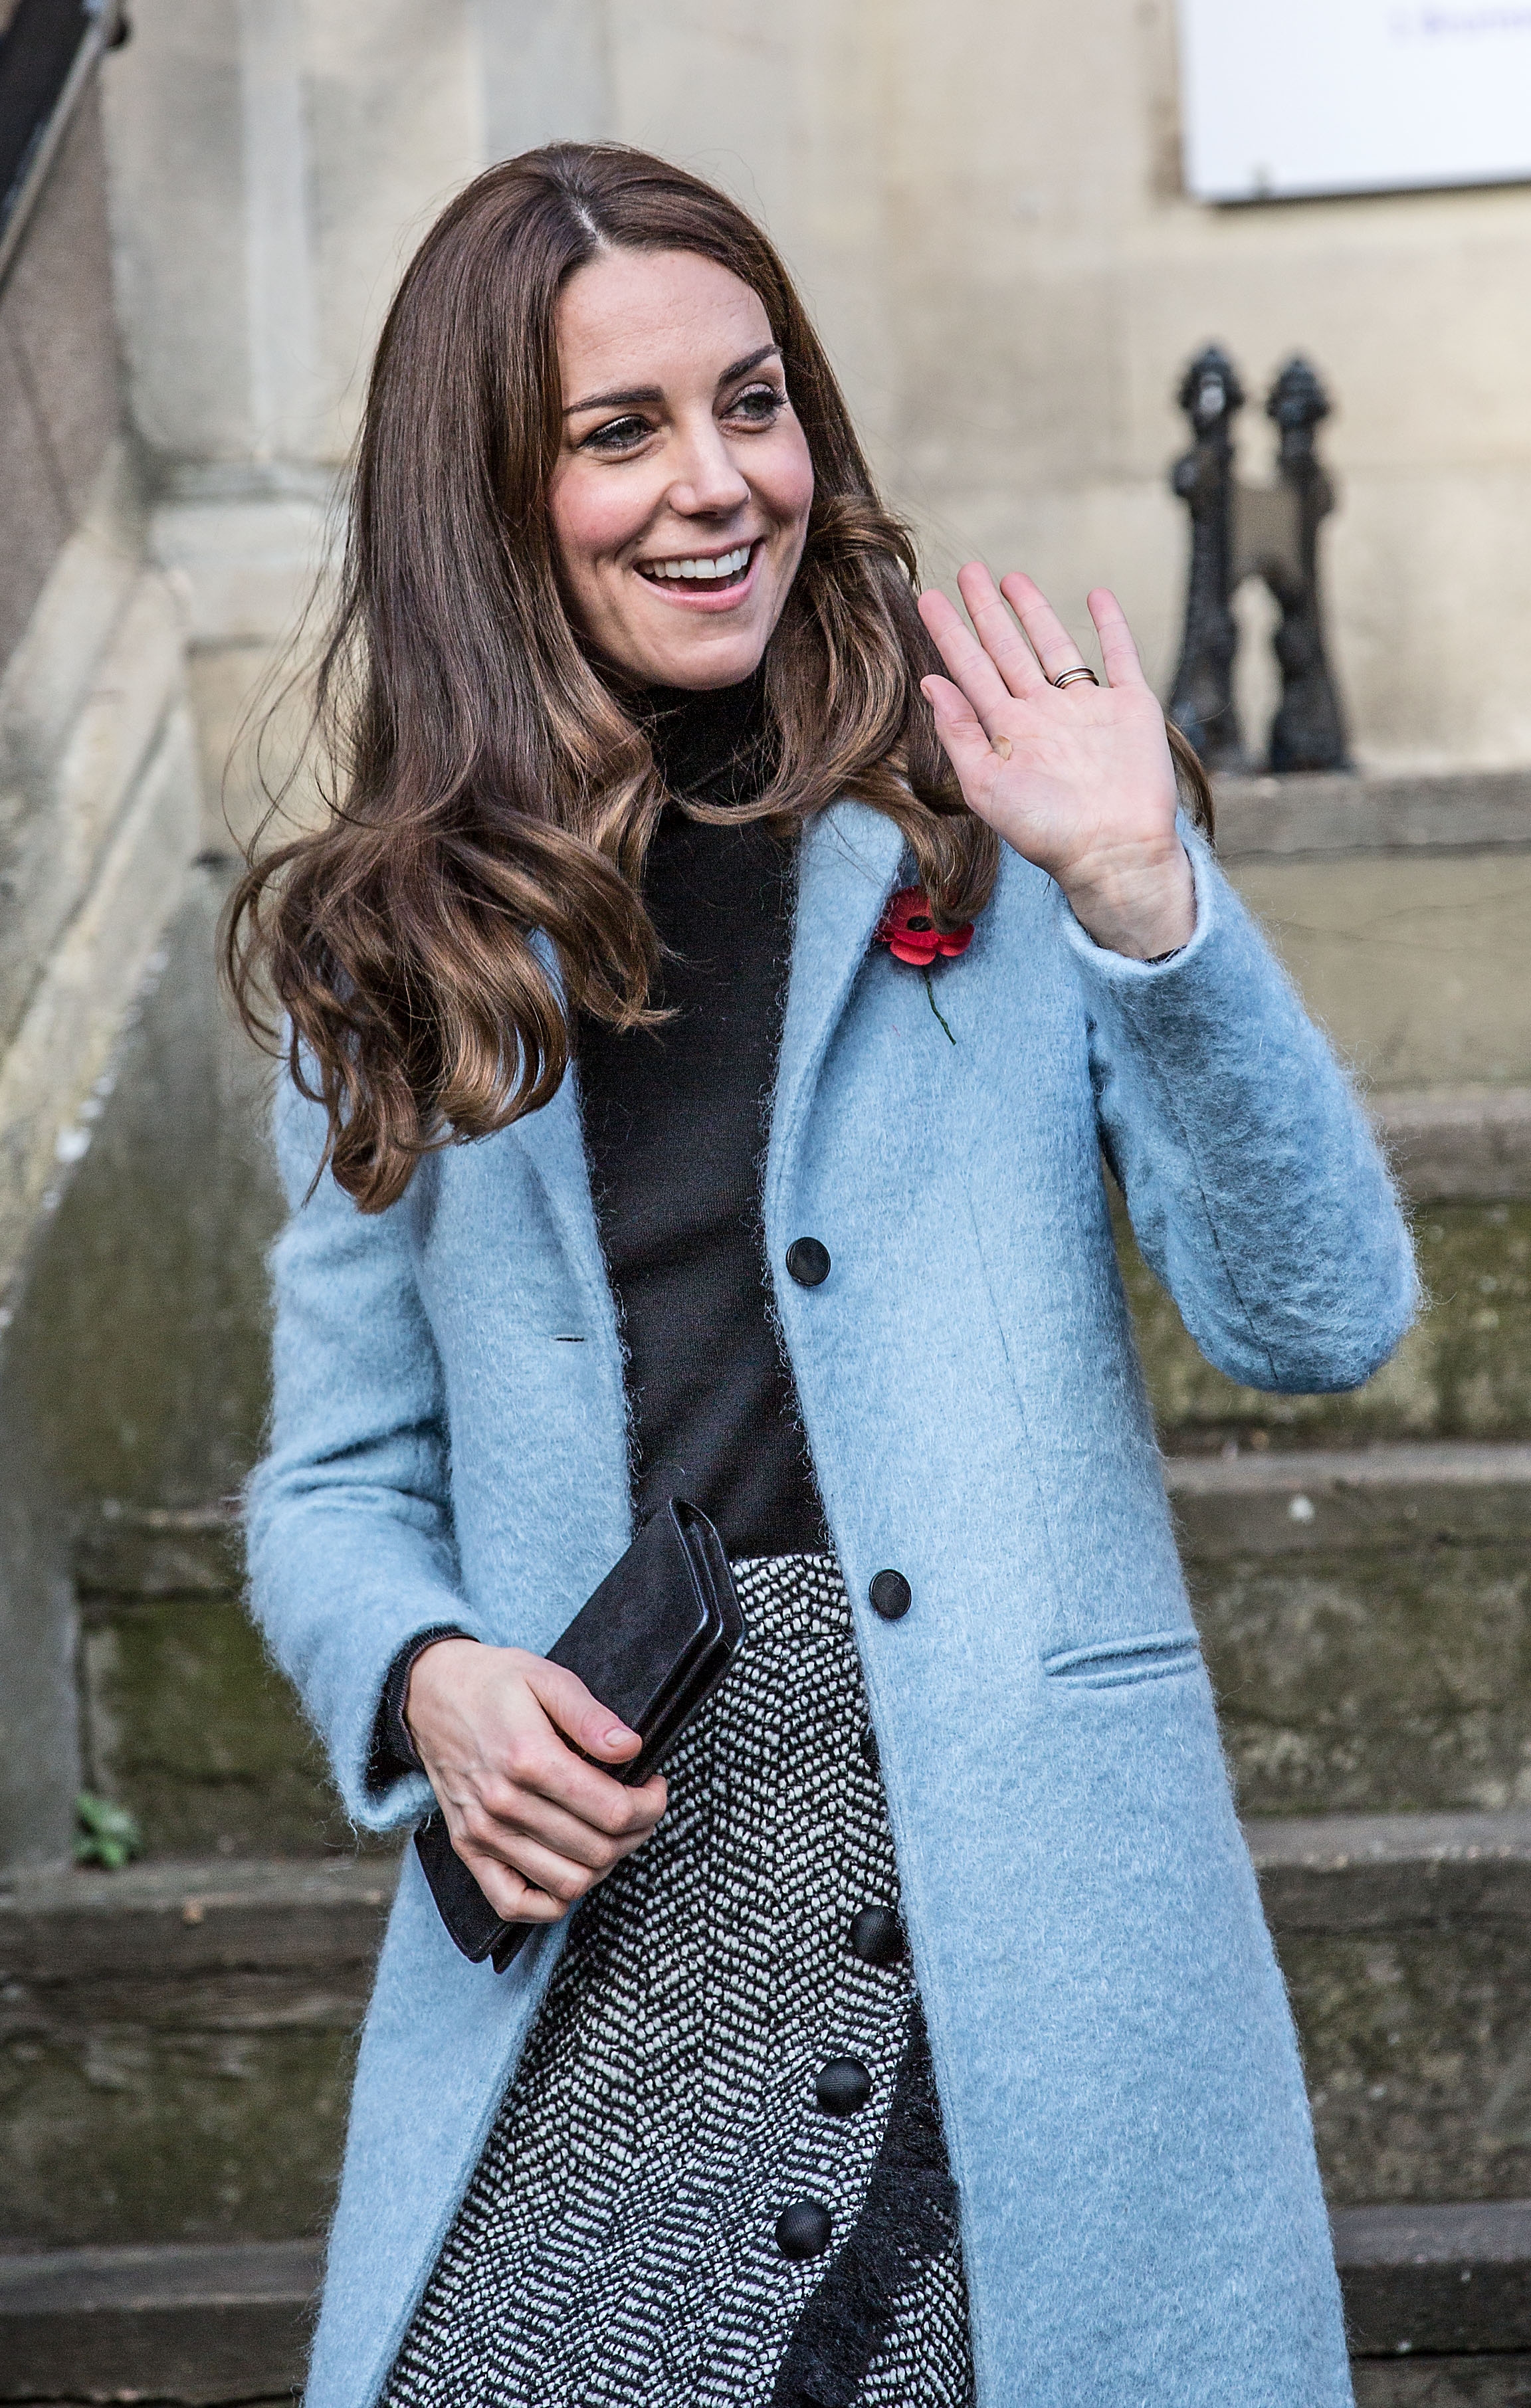 One expert explains why Kate Middleton always holds a clutch purse | Rare